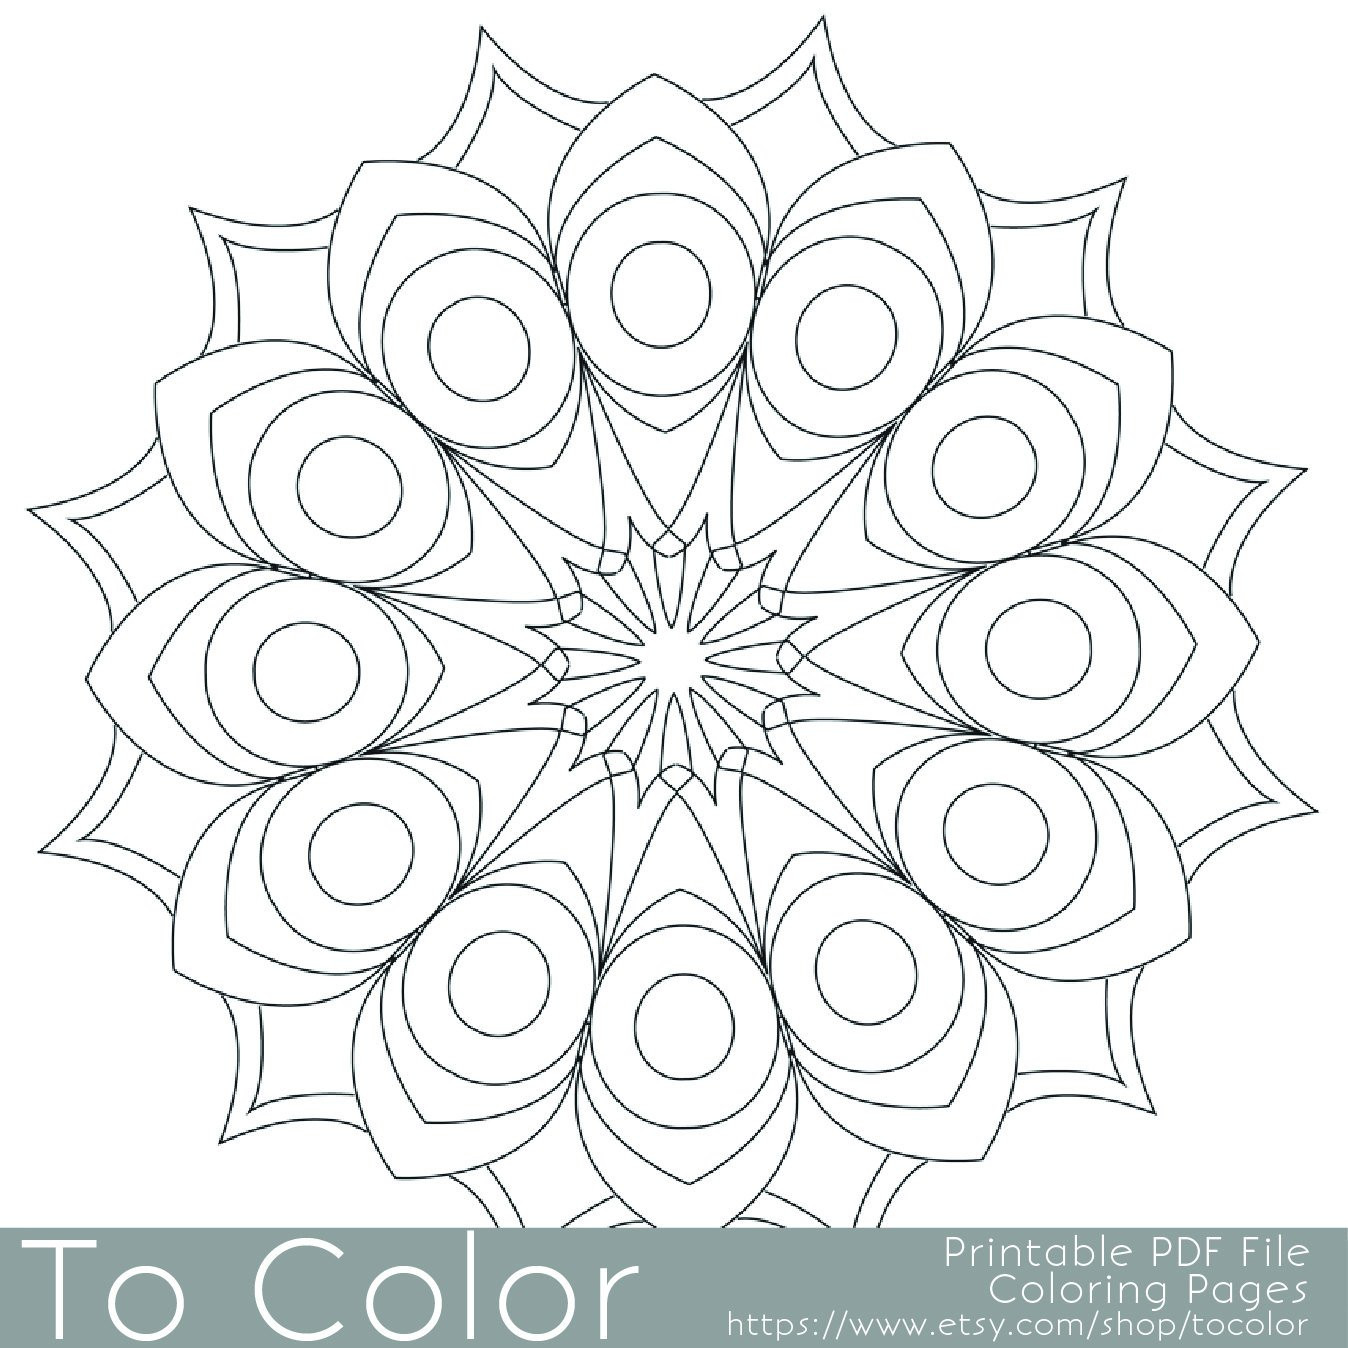 Simple Adult Coloring Pages
 Printable Circular Mandala Easy Coloring Pages for Adults Big